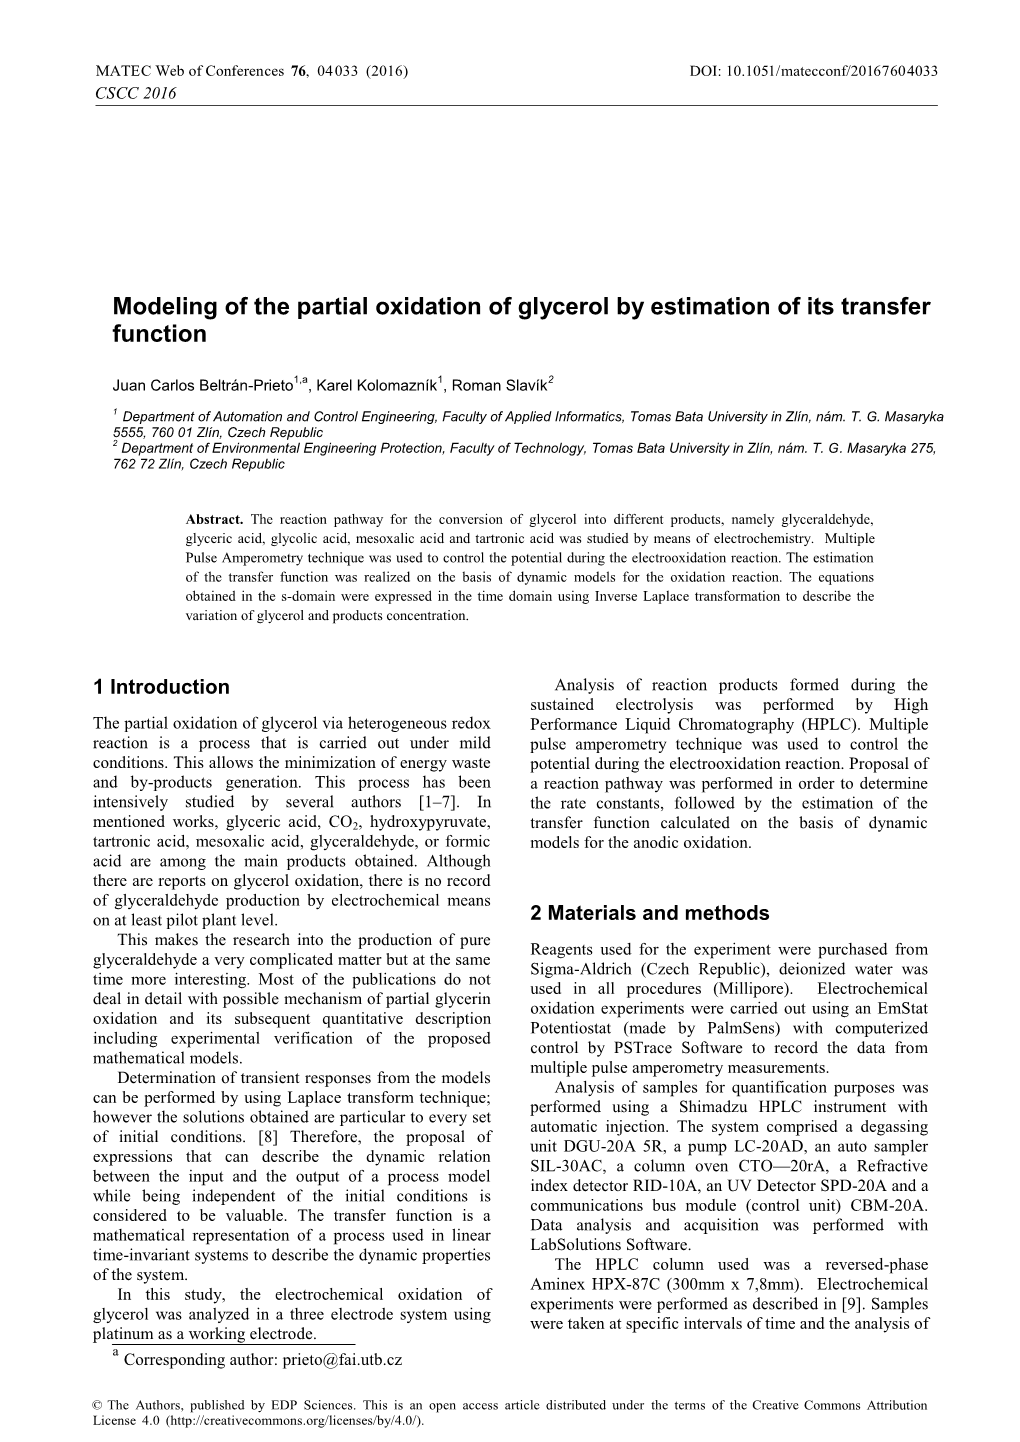 Modeling of the Partial Oxidation of Glycerol by Estimation of Its Transfer Function